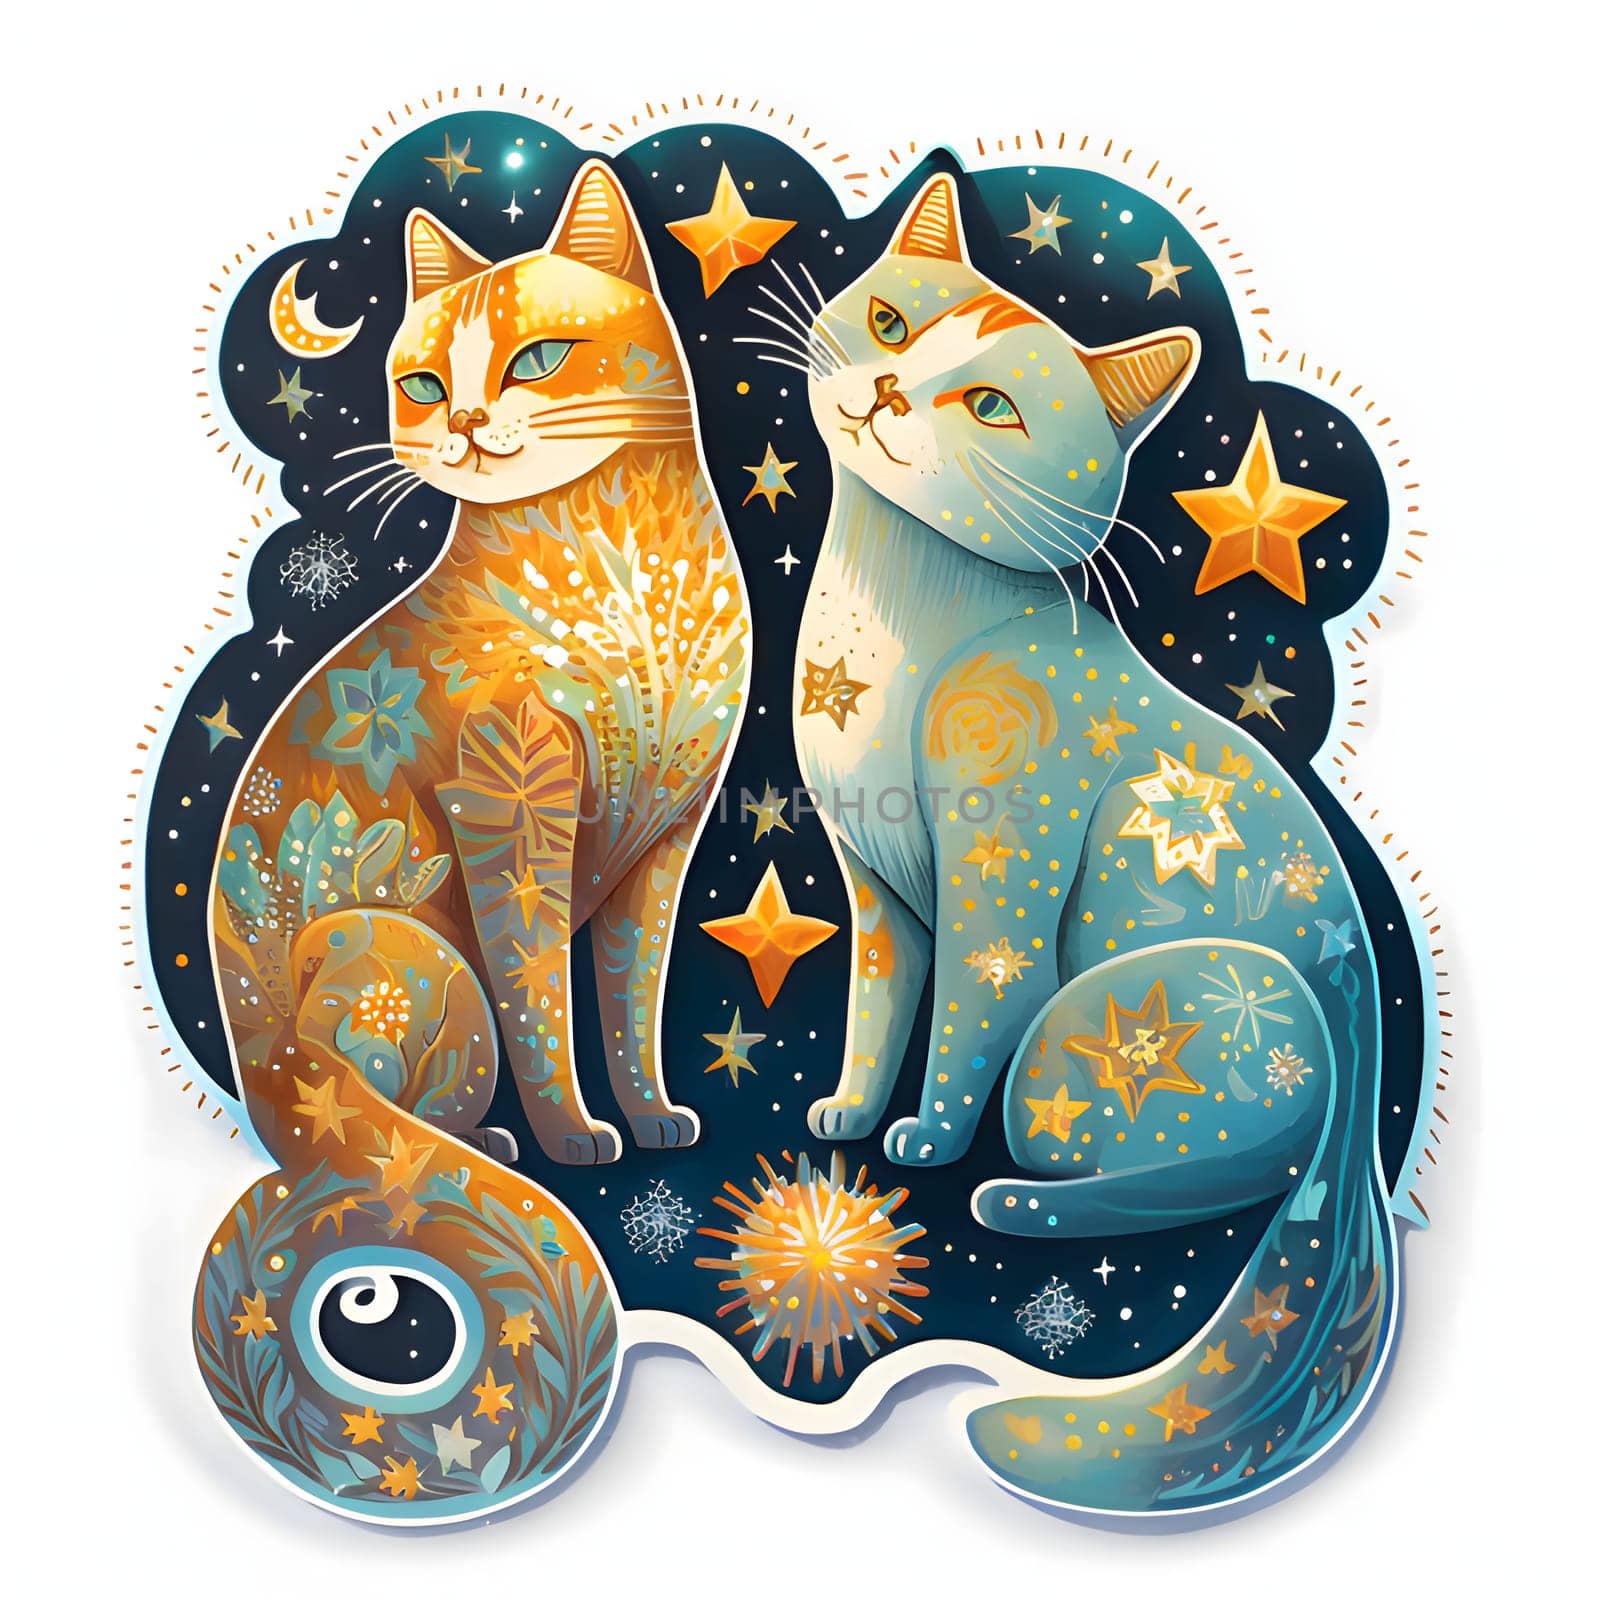 Illustration on a white background two cats decorated with stars. The Christmas star as a symbol of the birth of the savior. A Time of Joy and Celebration.